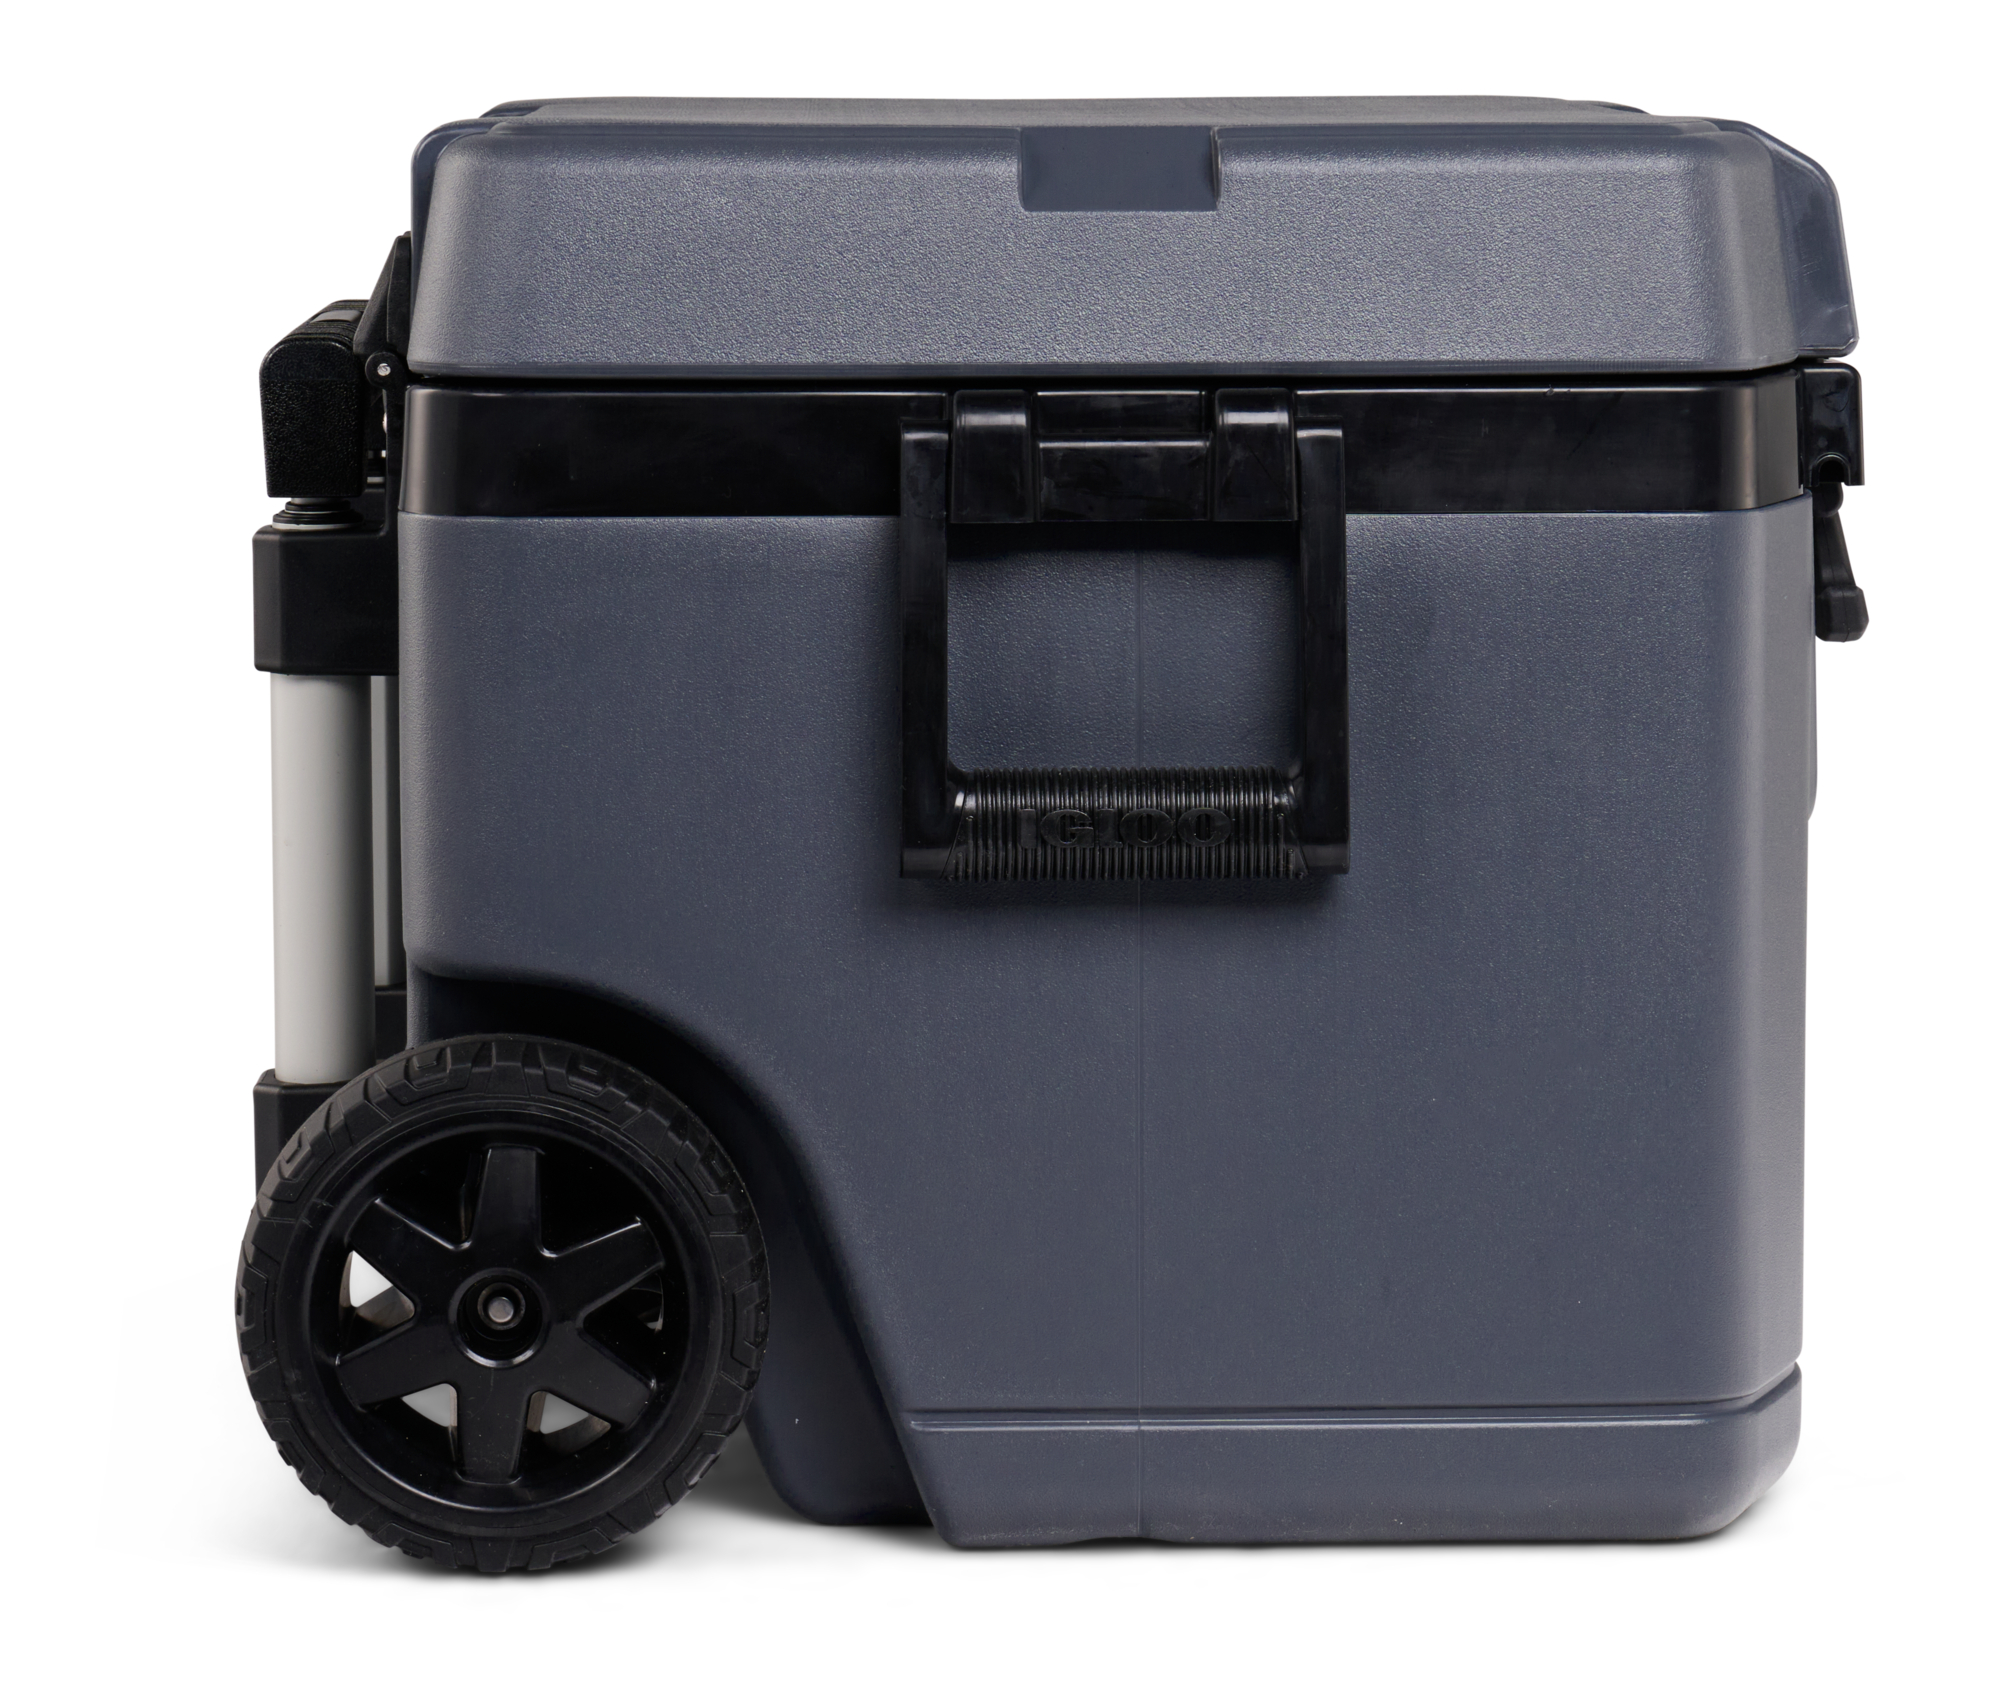 Igloo Overland 52 QT Ice Chest Cooler with Wheels, Gray (26" x 19" x 16") - image 4 of 17